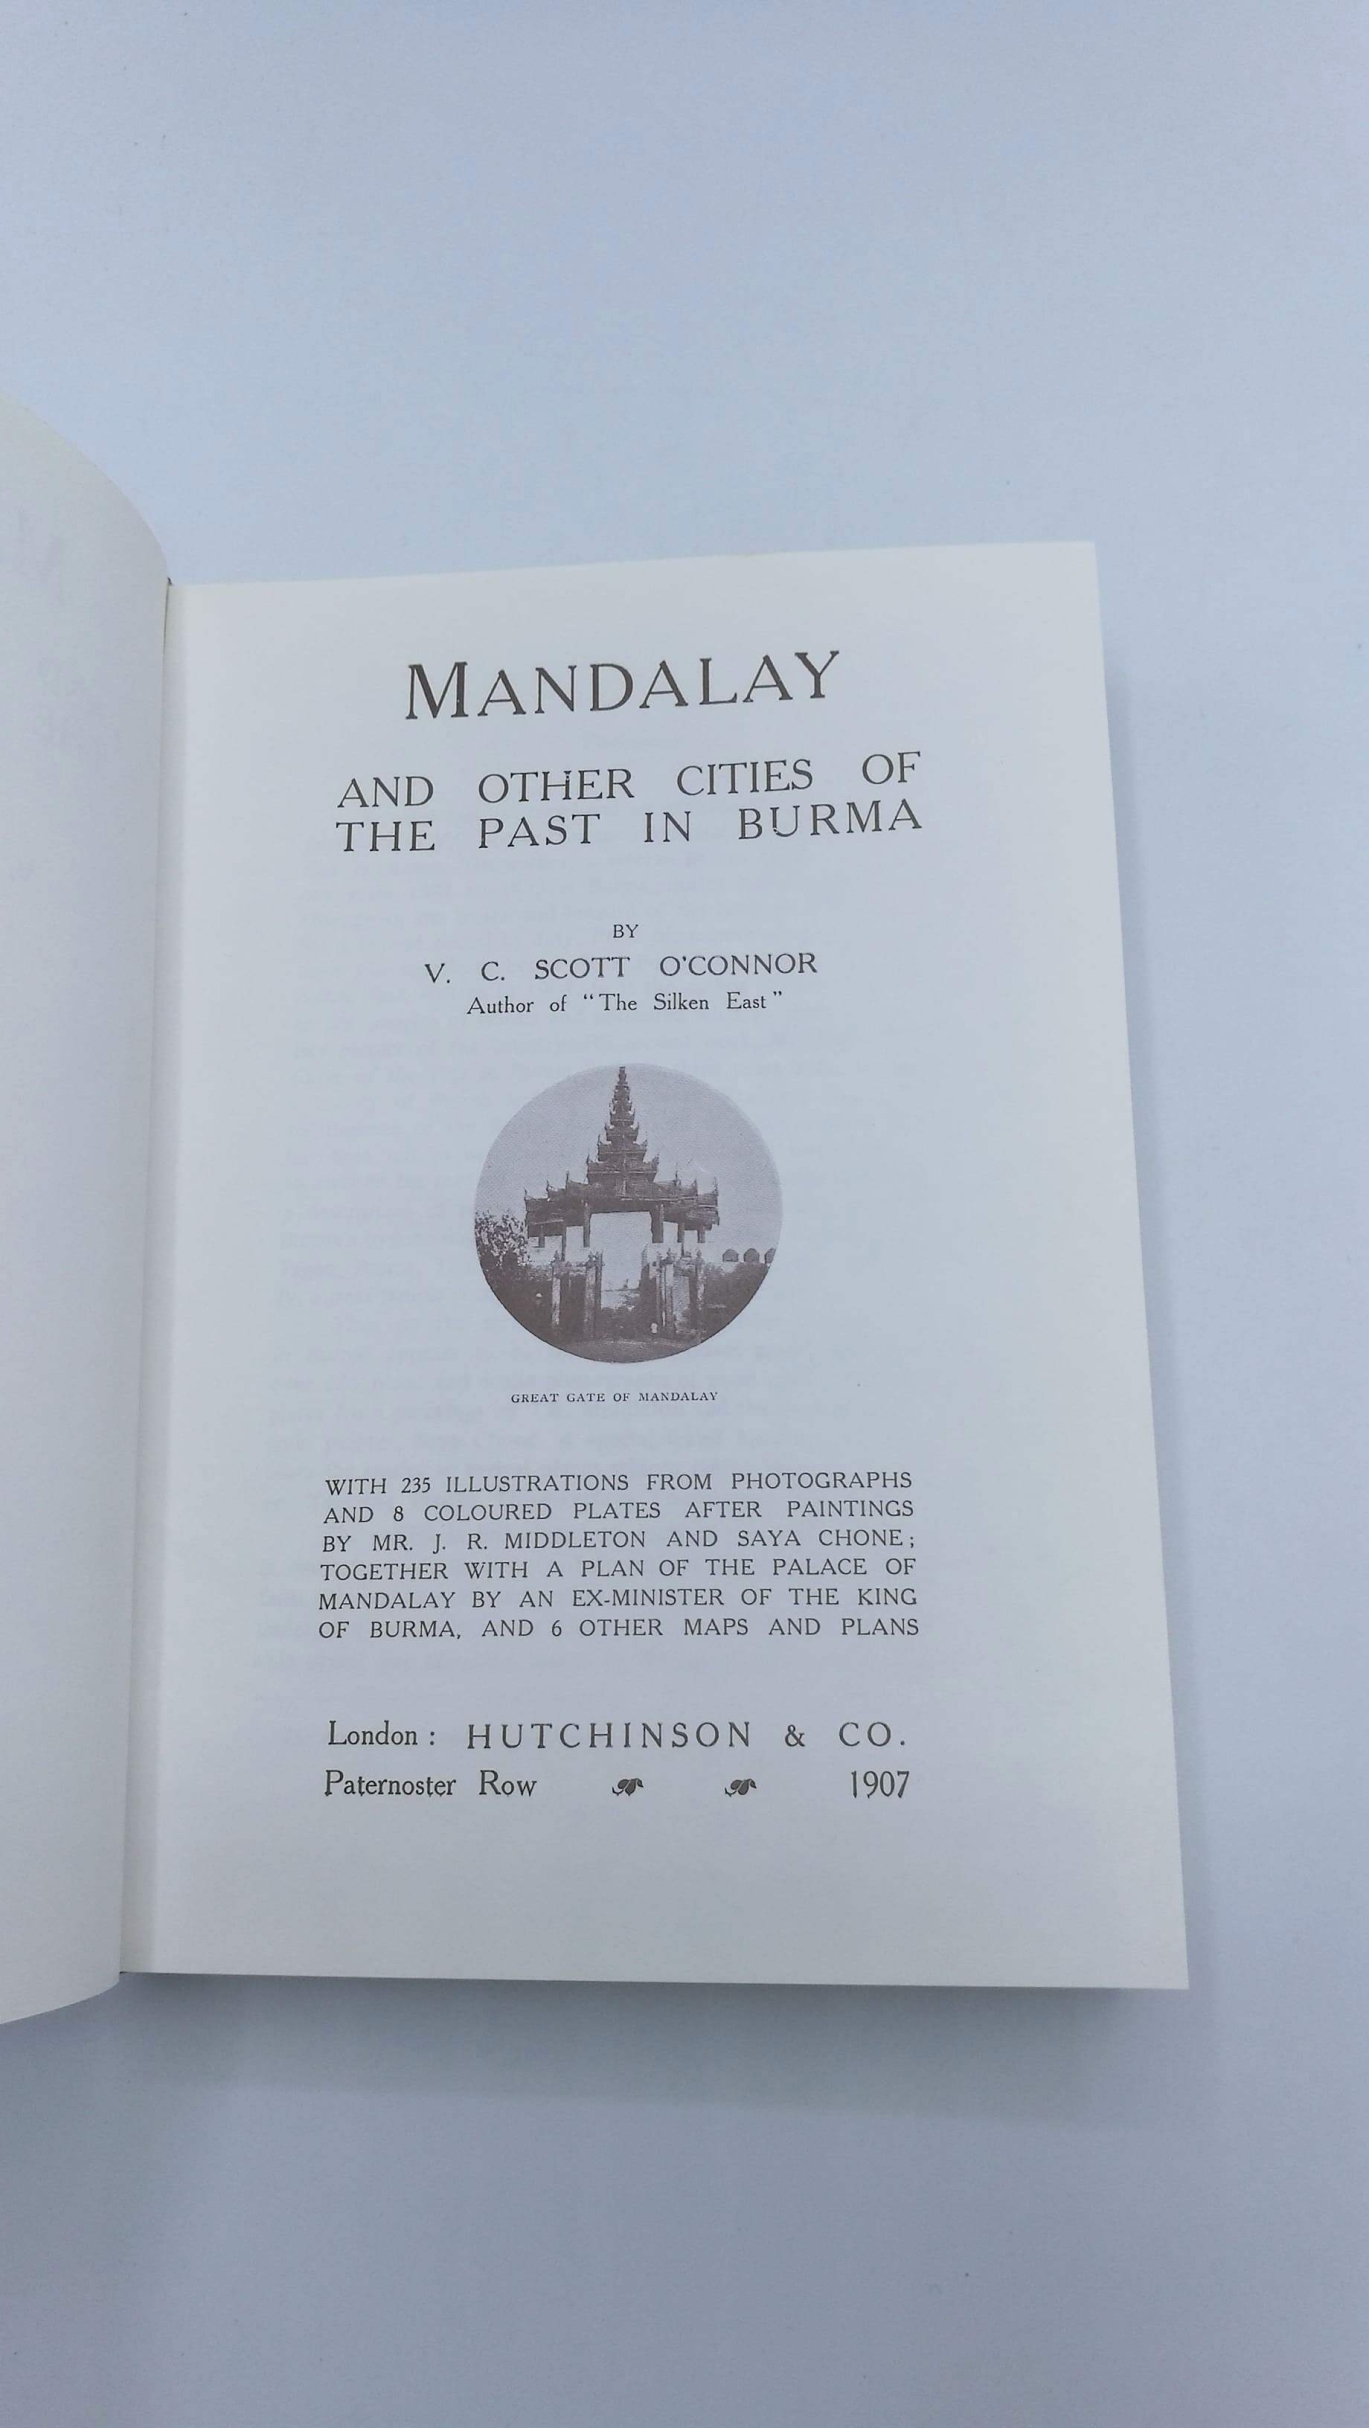 O'Connor, V. C. Scott: Mandalay and Other Cities of the Past in Burma